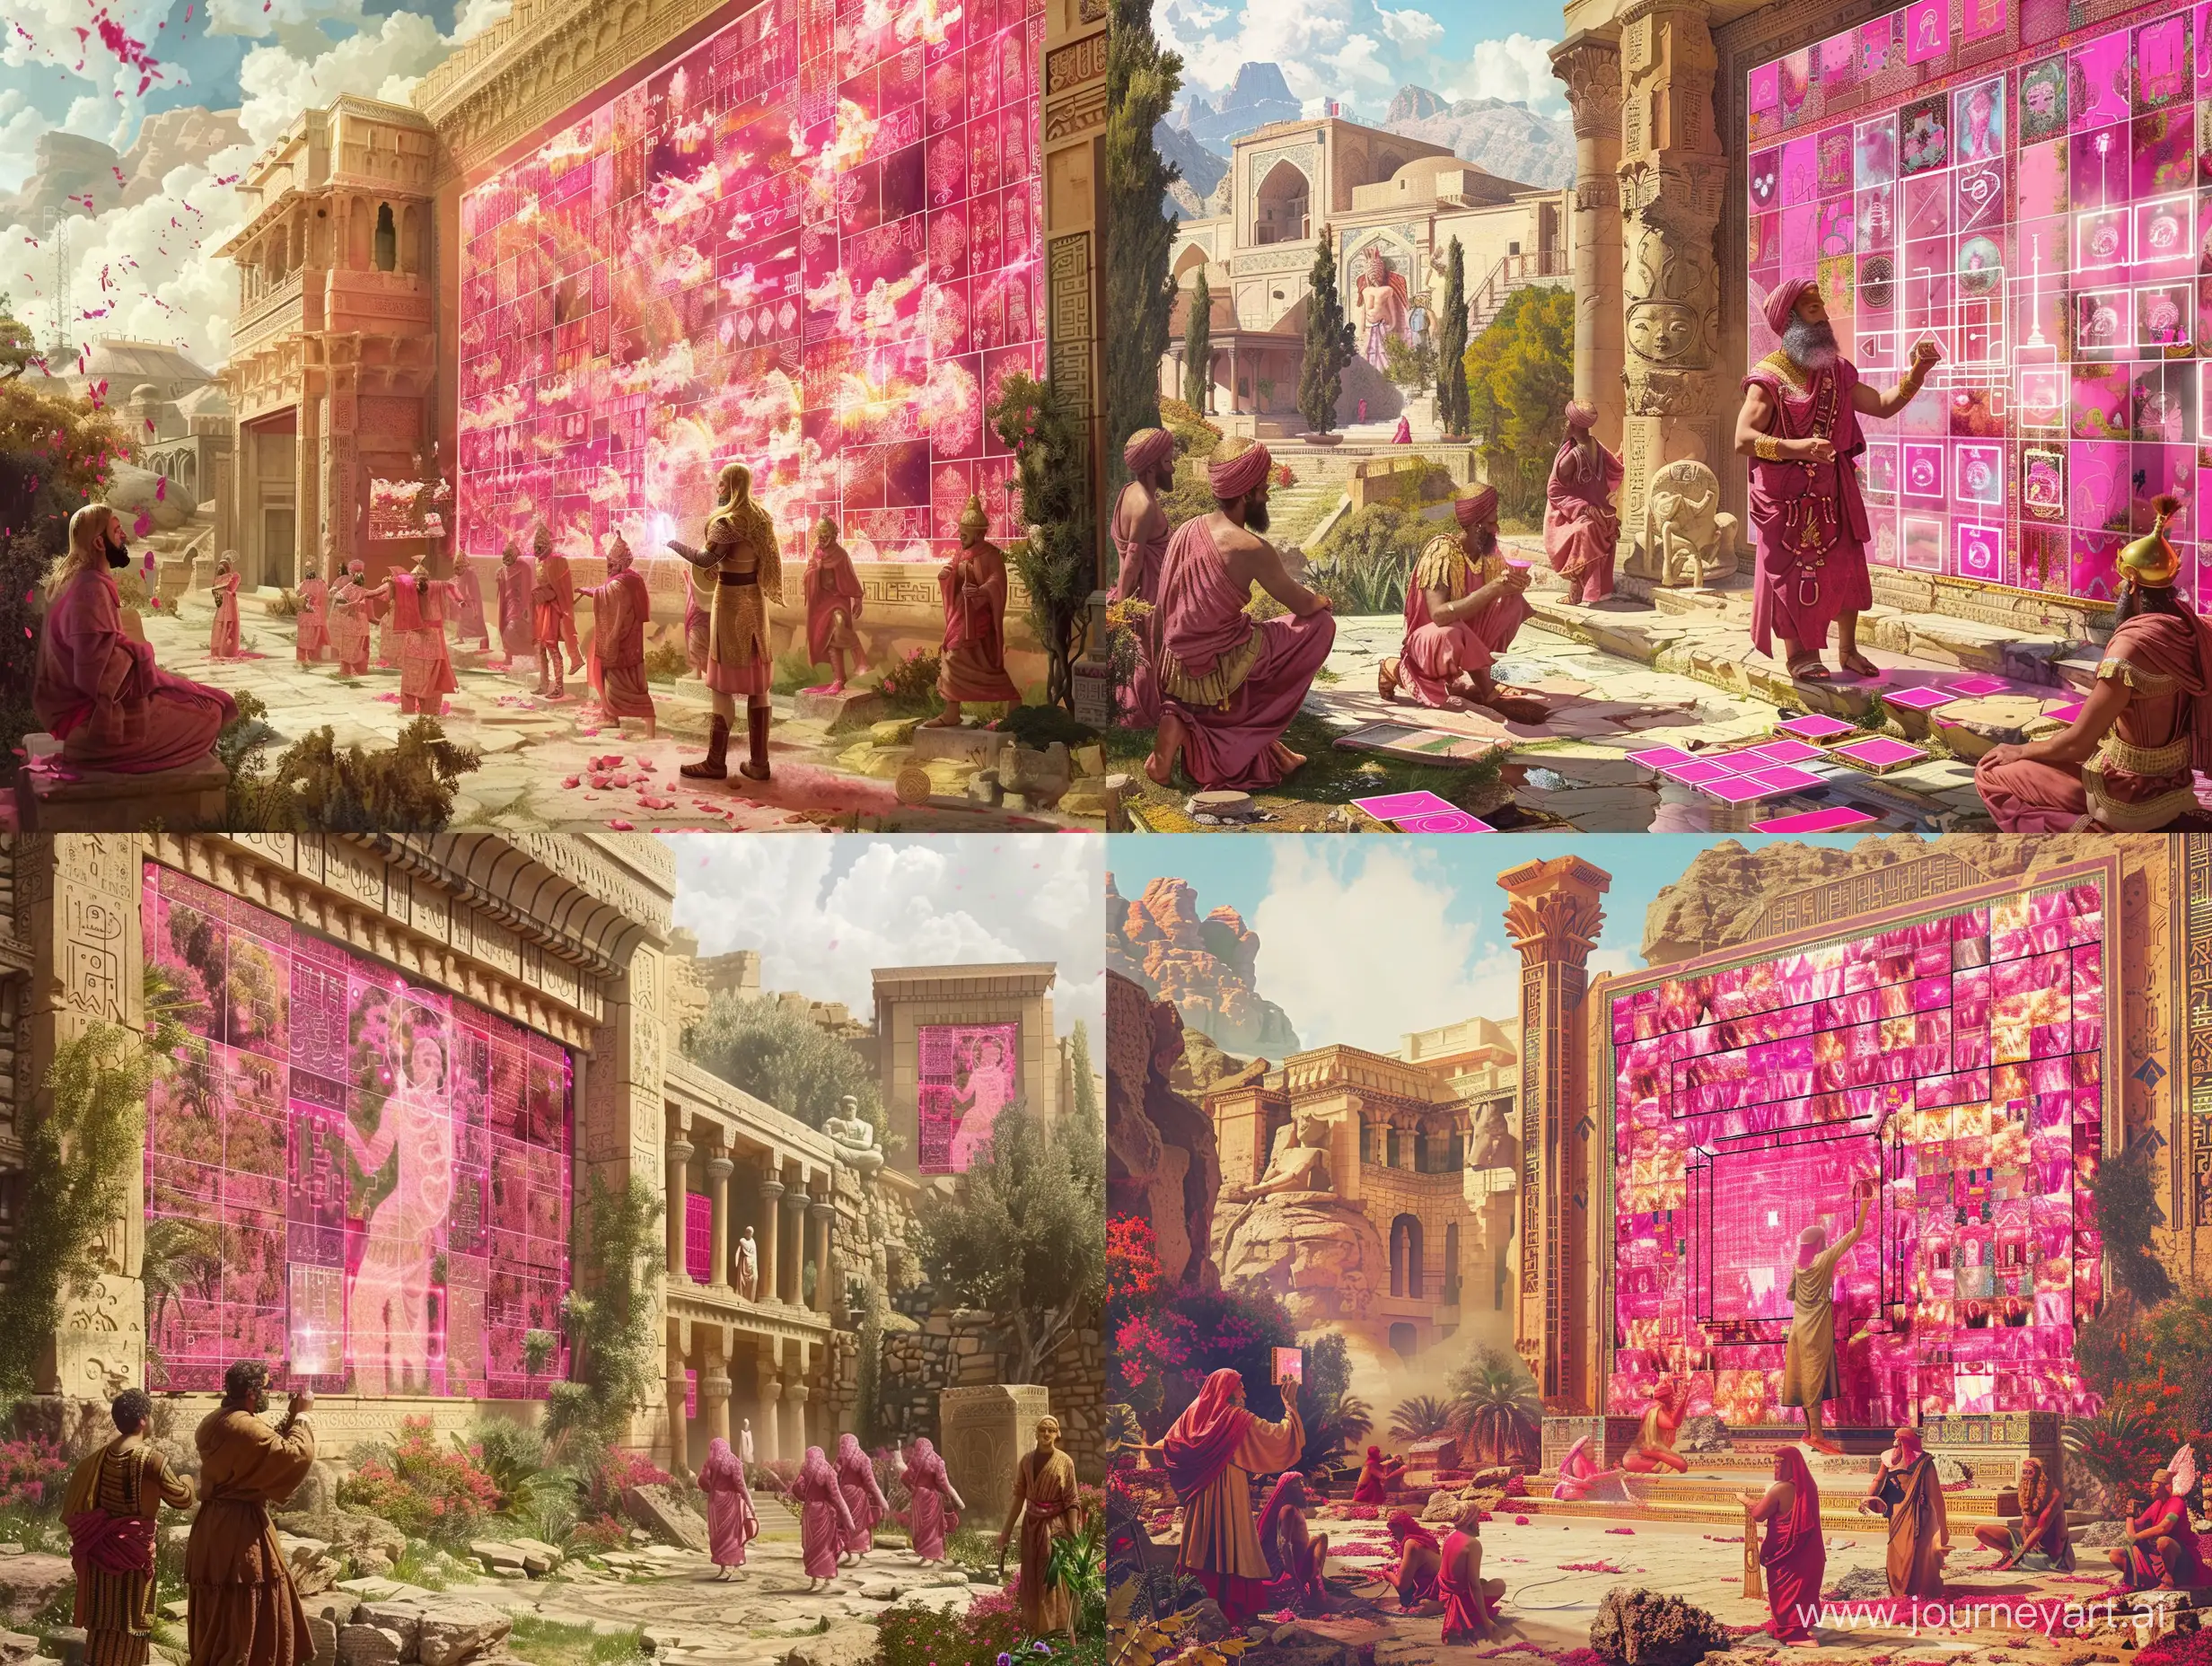 Imagine a scene from the ancient world, where a craftsman and magician, a Prometheus-like figure, is creating a god using machine learning techniques. This solitary figure is not typically Persian in appearance, setting him apart in the scene. He is surrounded by gods he previously created, and together they are constructing a magnificent wall filled with beautiful images that carry a dominant pink theme. The setting is rich with Persian cultural elements - intricate patterns, traditional architectural details, and lush, vibrant landscapes. The contrast between the ancient setting and the modern aspect of the magician, who stands out as the only man in the image, should be stark and compelling. Focus on the interaction between the craftsman and his divine creations, highlighting the fusion of mythology and technology.